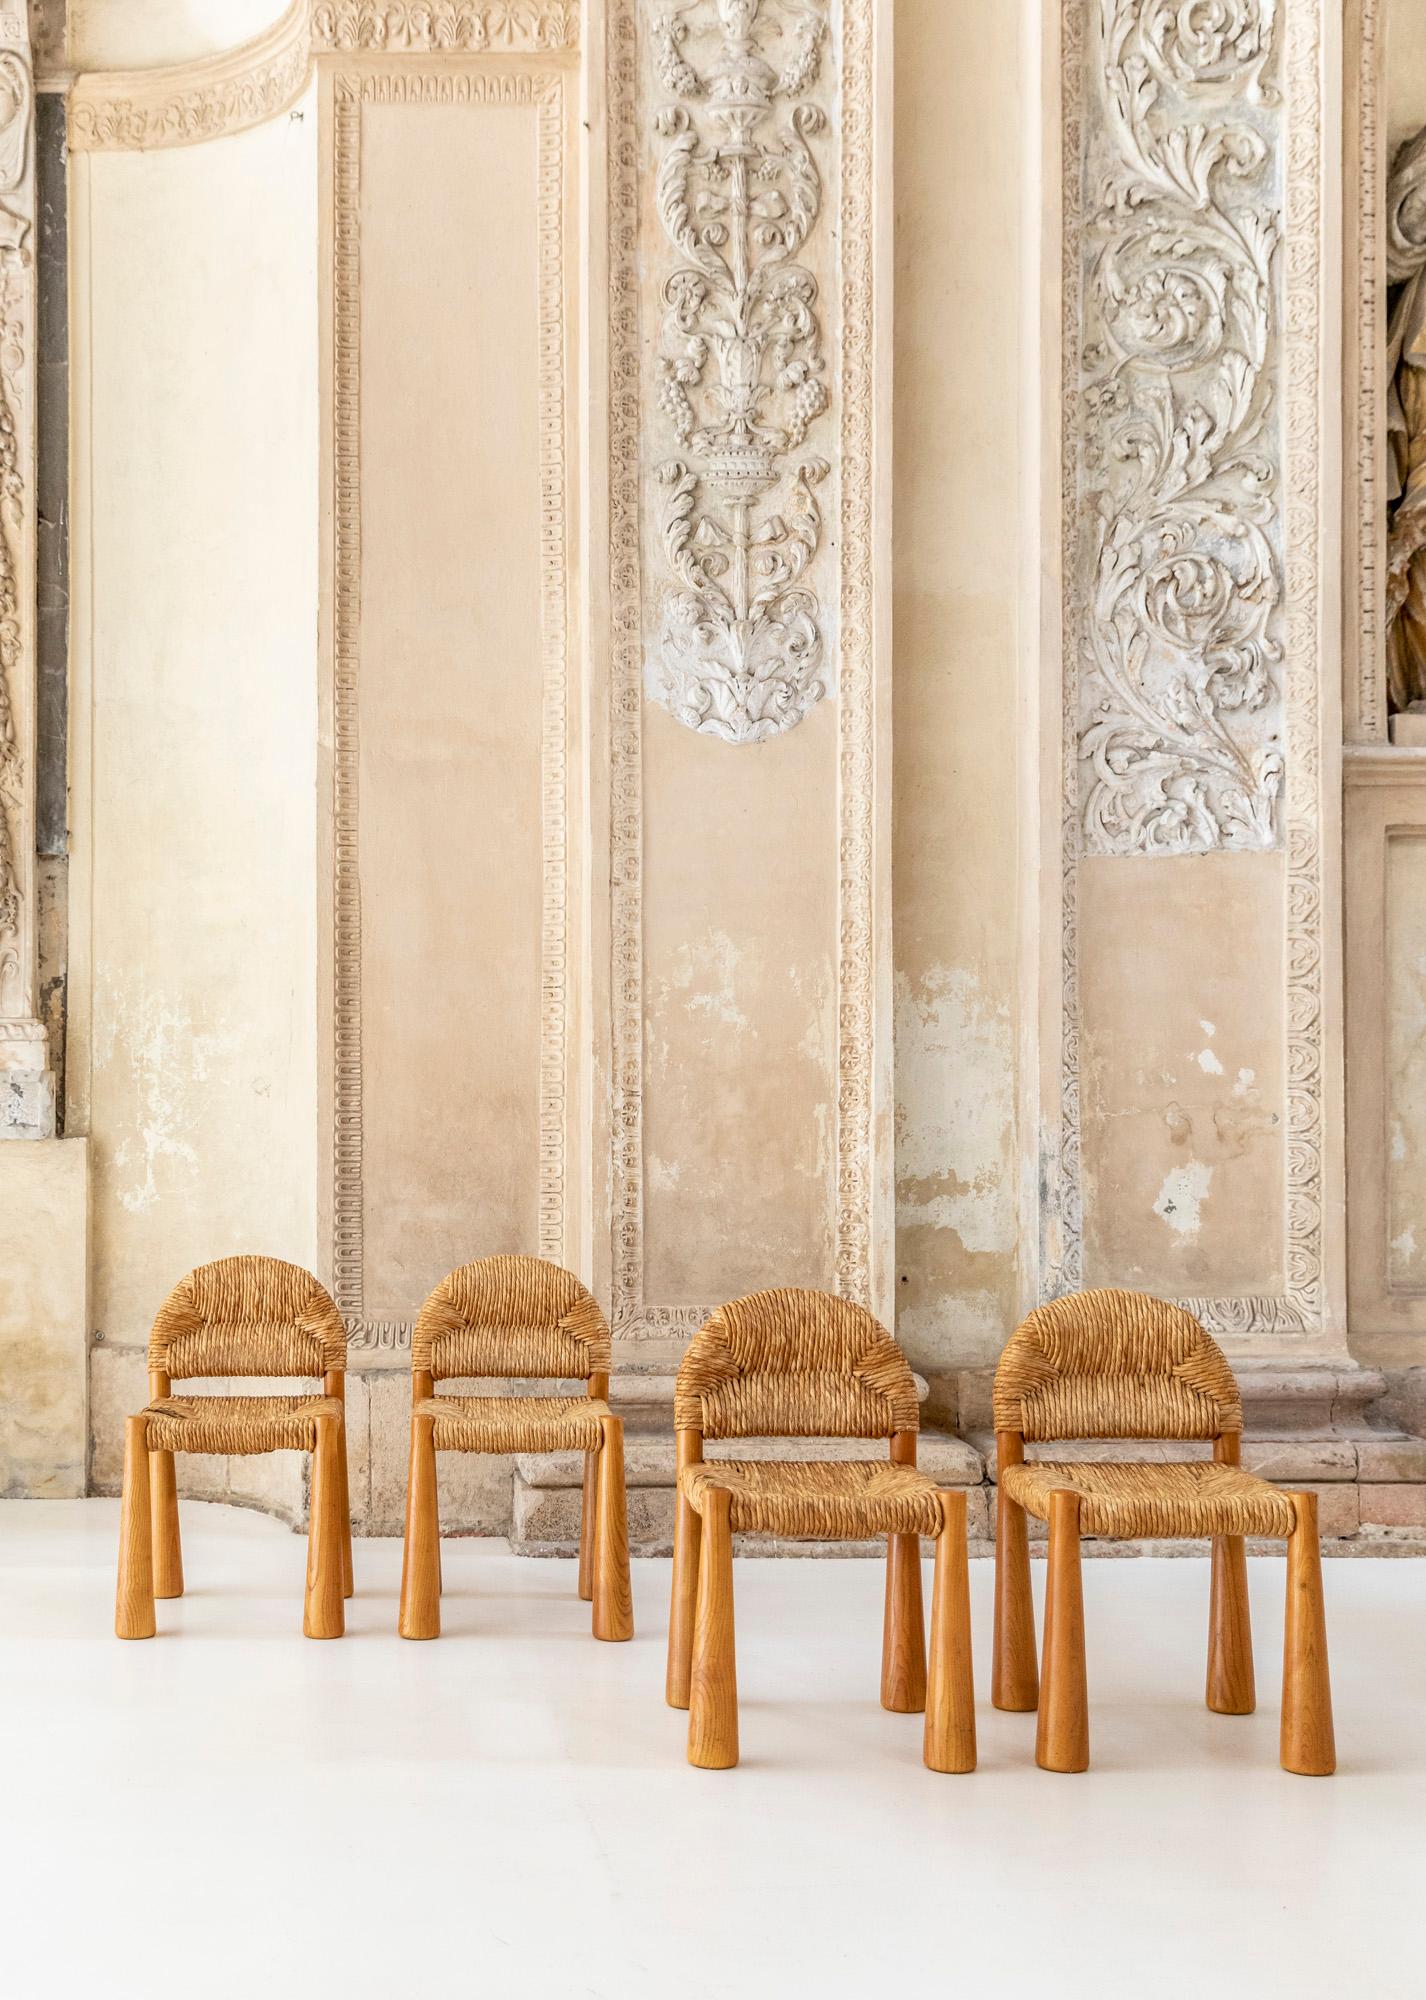 Toscanella wooden chairs designed by Alessandro Becchi. 
Beautiful chairs with straw back and seat characterized by sculptural cone-shaped legs. 
Italy 1960.